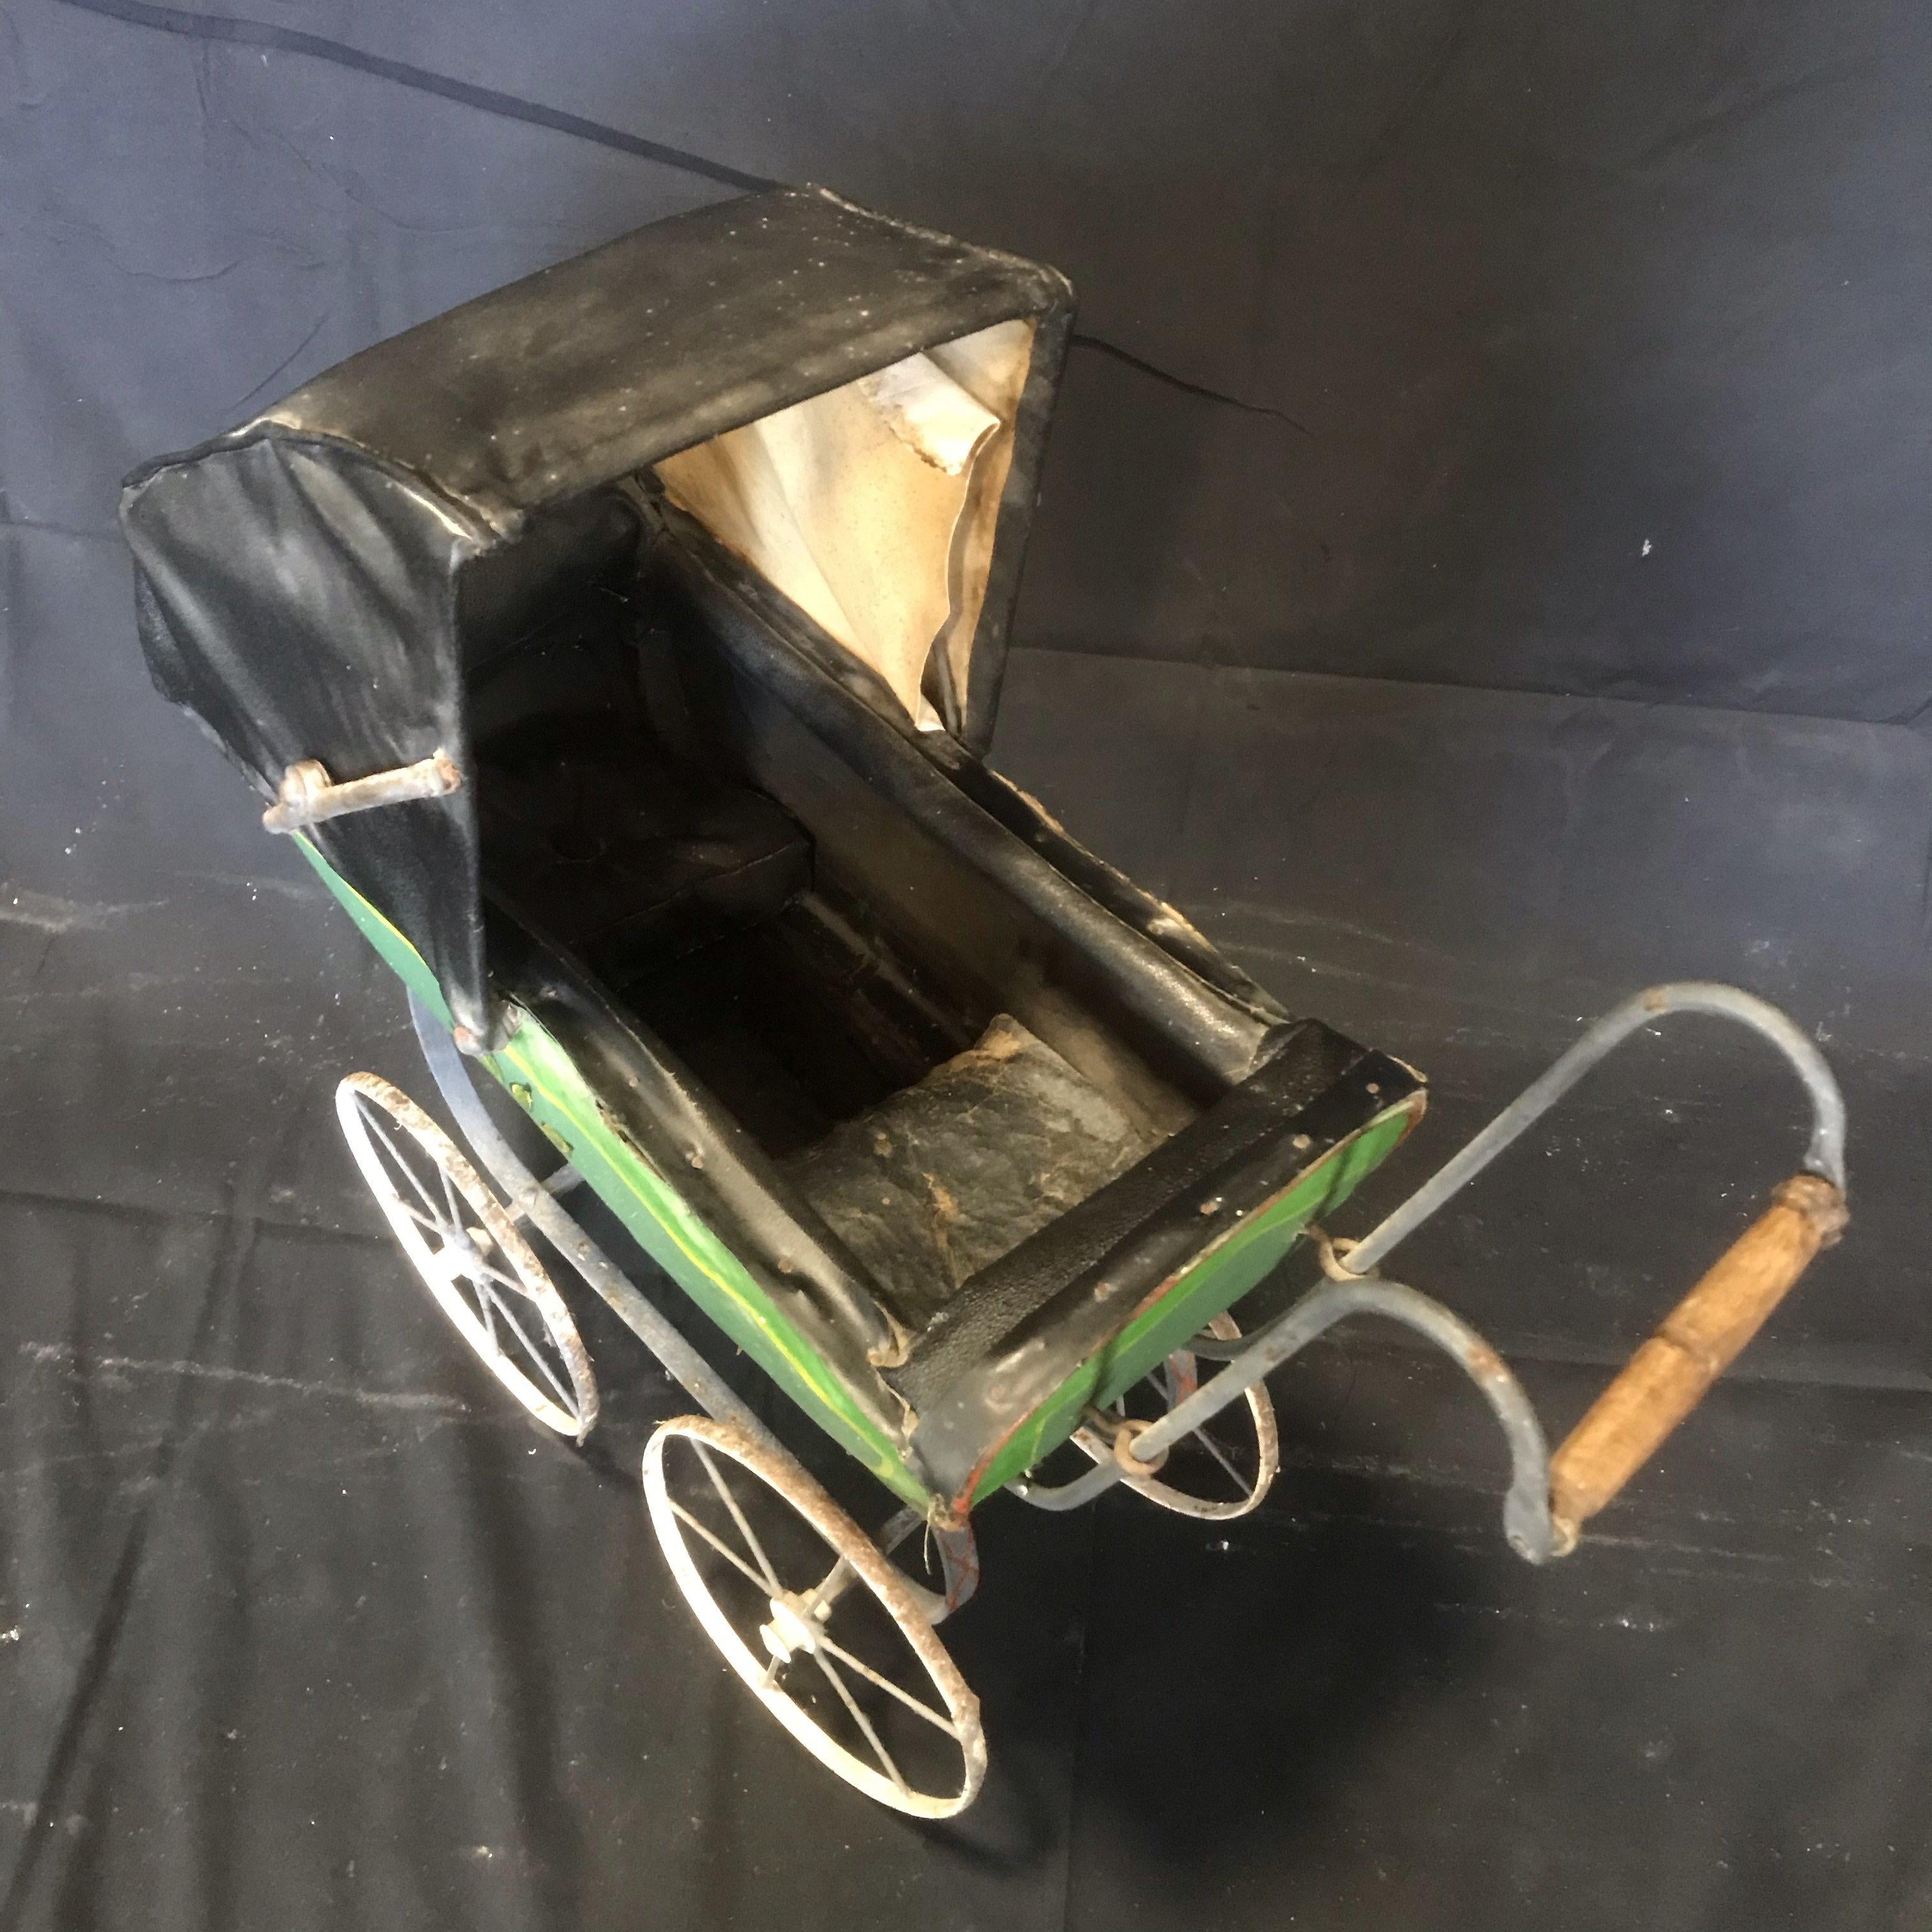 Bought in the south of France this set of antique doll carriages are an enchanting collection with wooden handles, original paint, and working wheels.
Measures: Largest 31.5 H, 14 W, 28.5 D
Smallest 21 H, 11 W, 21. 5 D.